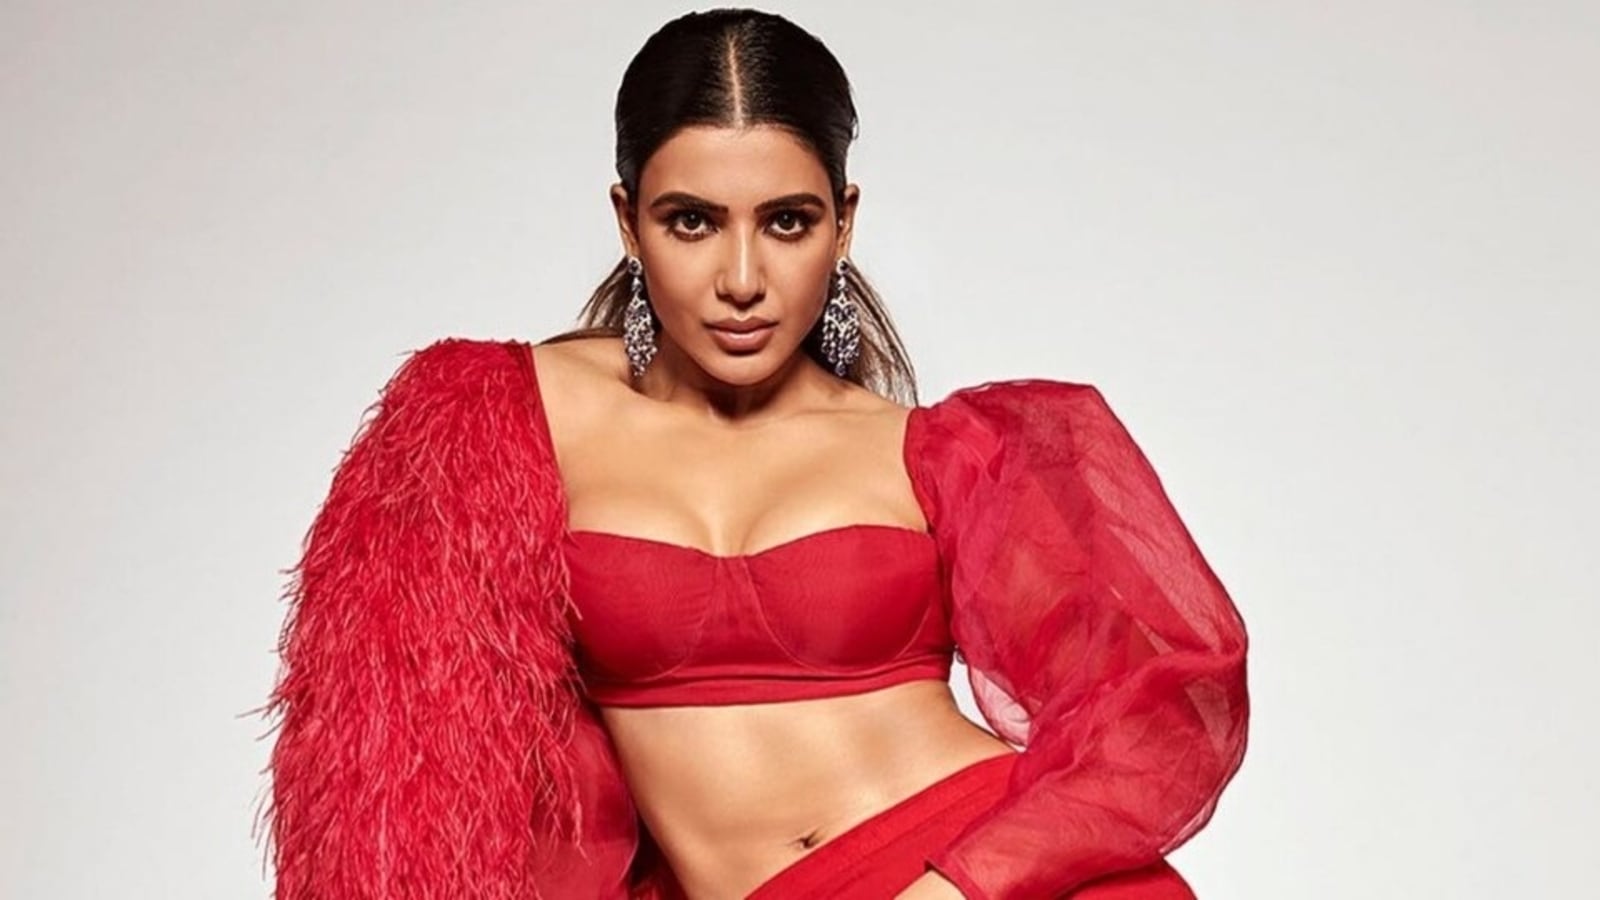 Telugu Acoters Samantha Xxx Nude Videos - Samantha Ruth Prabhu nails Barbell Squats with her A team in workout video  | Health - Hindustan Times